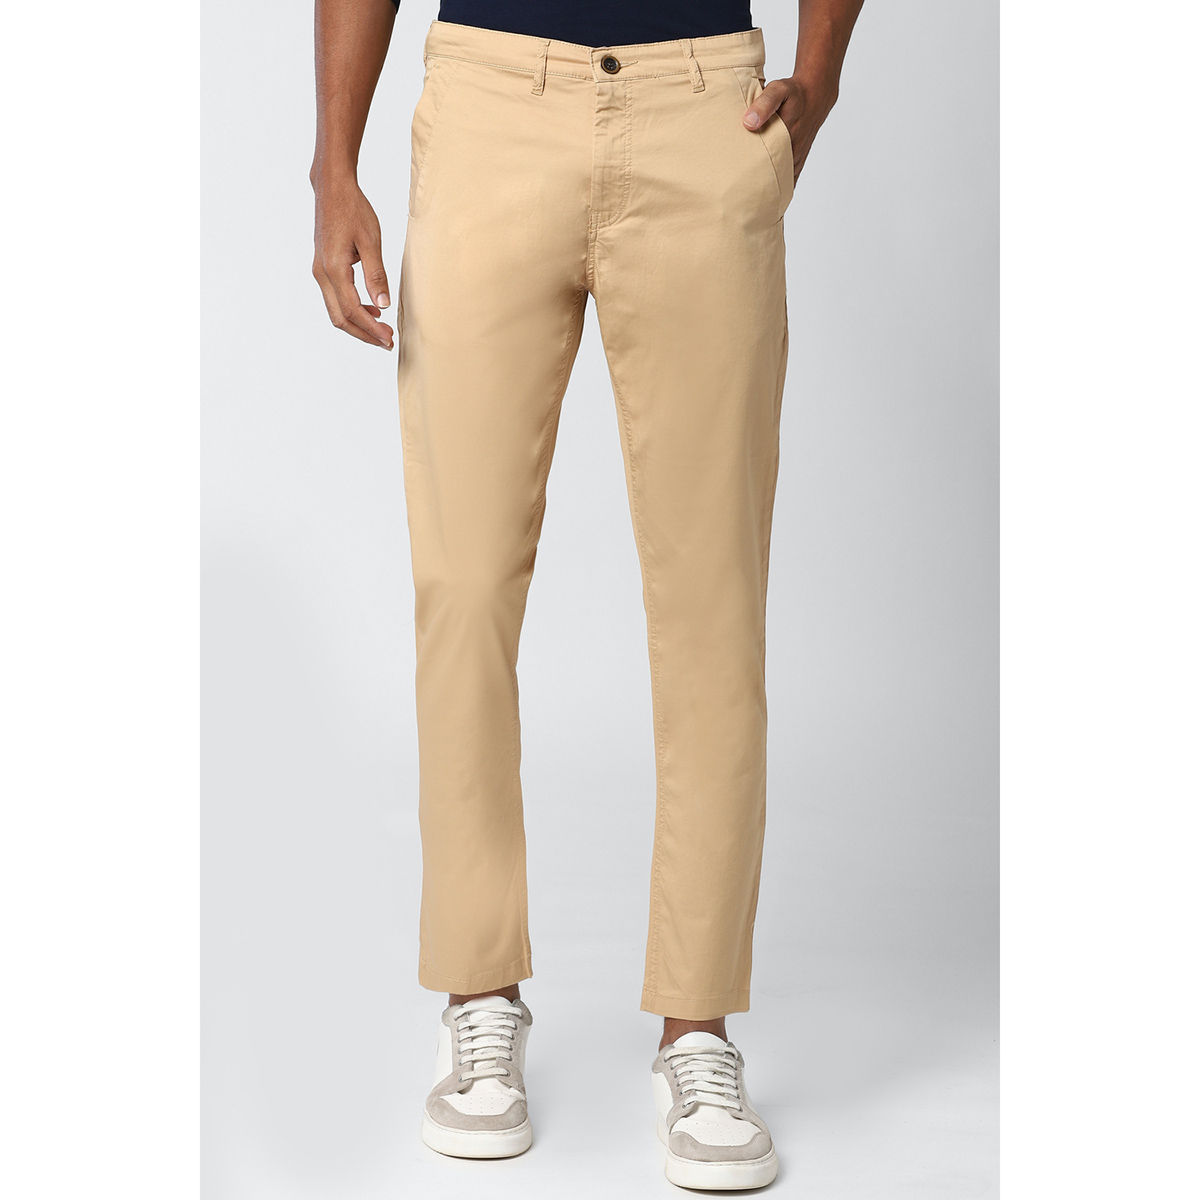 Buy Peter England Coffee Brown Super Slim Fit Casual Trousers - Trousers  for Men 1615117 | Myntra